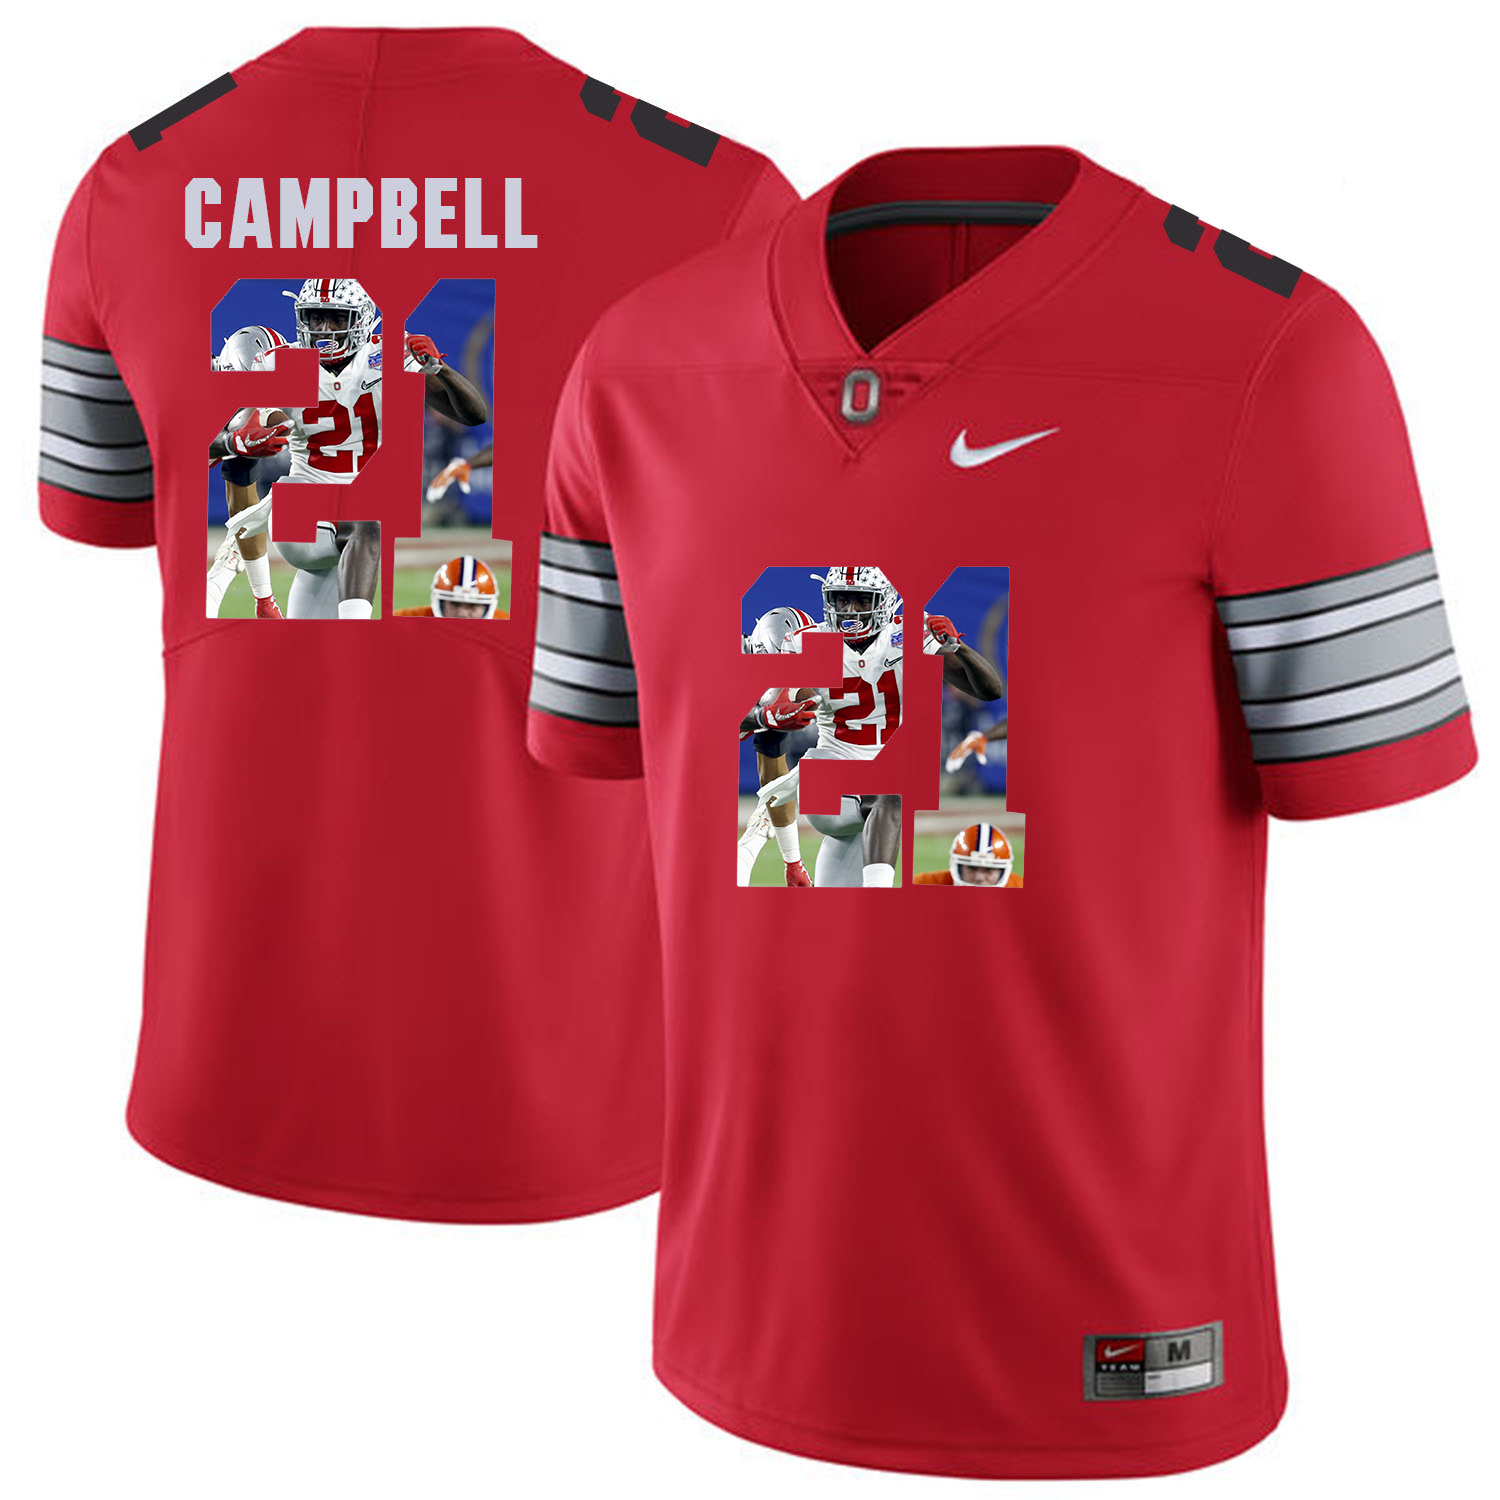 Men Ohio State 21 Gampbell Red Fashion Edition Customized NCAA Jerseys